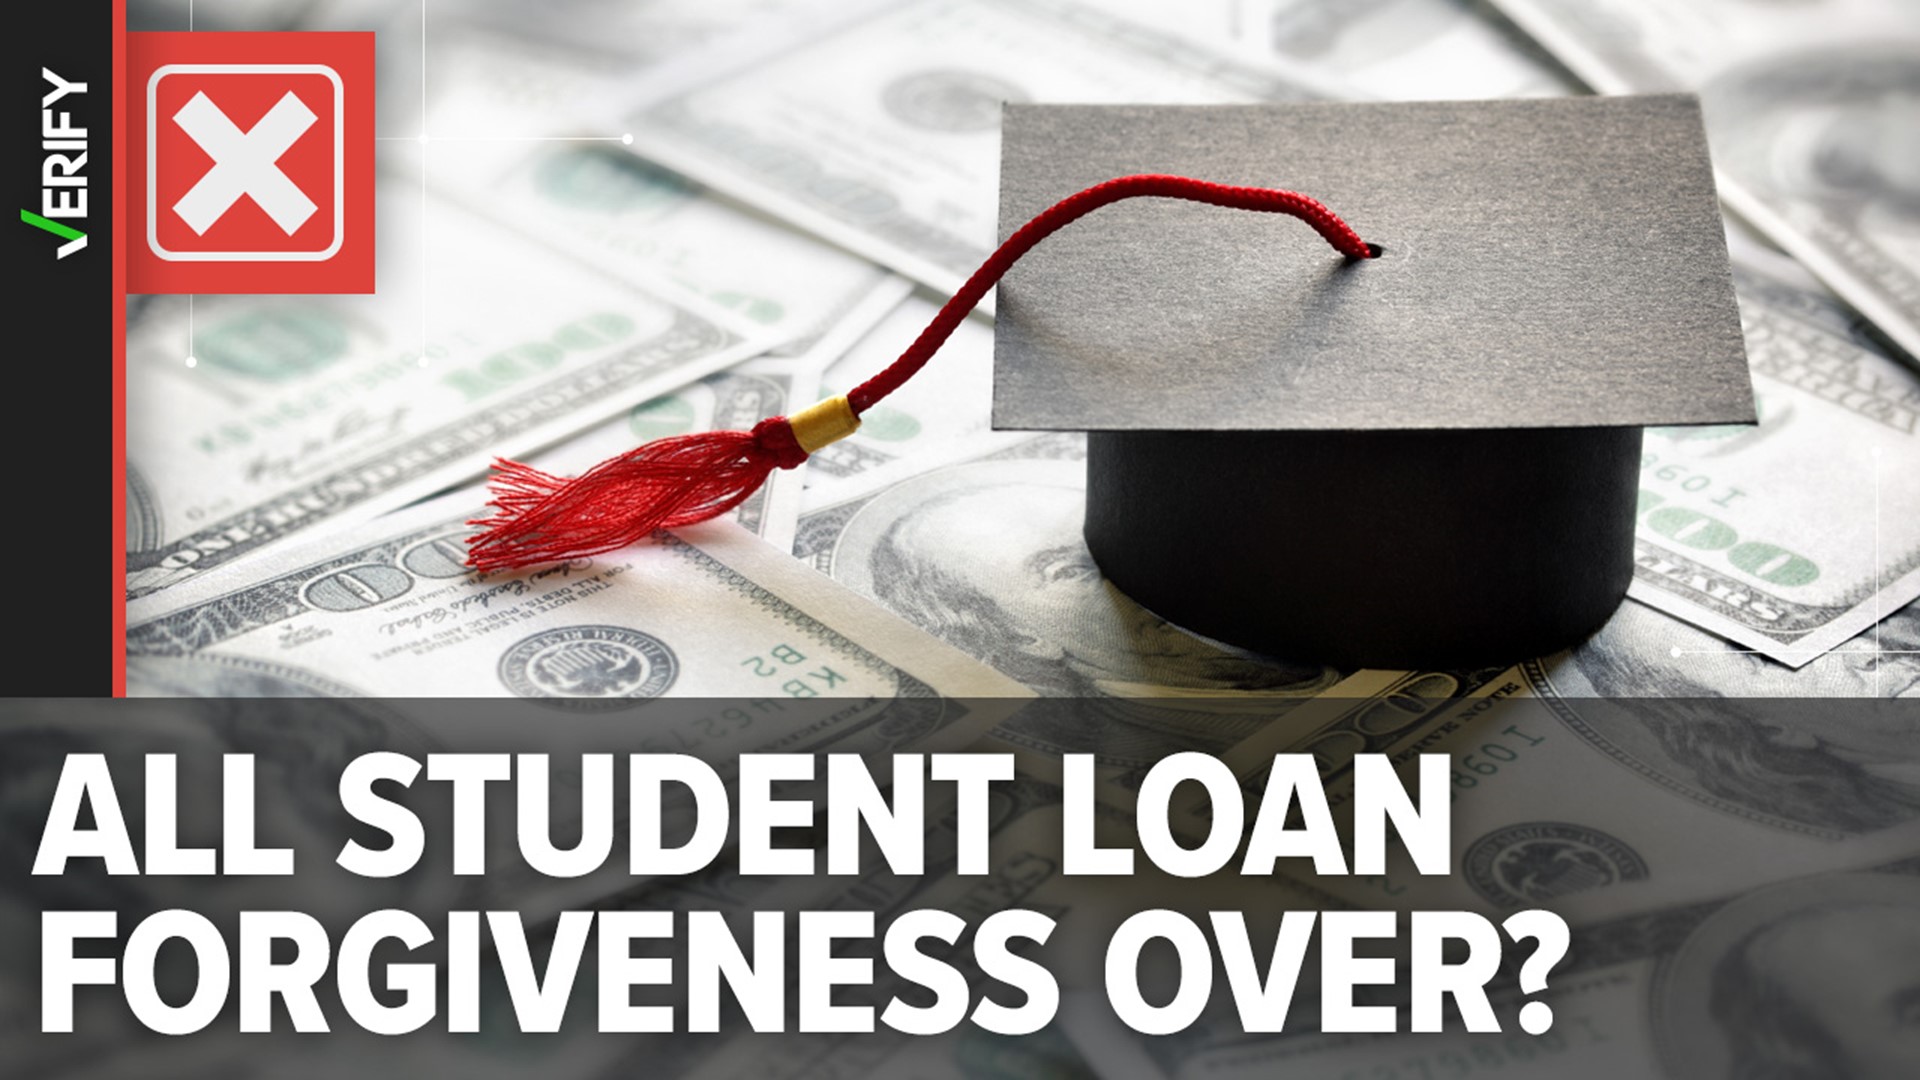 The Supreme Court ruled against the Biden administration’s plan for one-time student loan forgiveness for most borrowers. But other forgiveness programs remain.